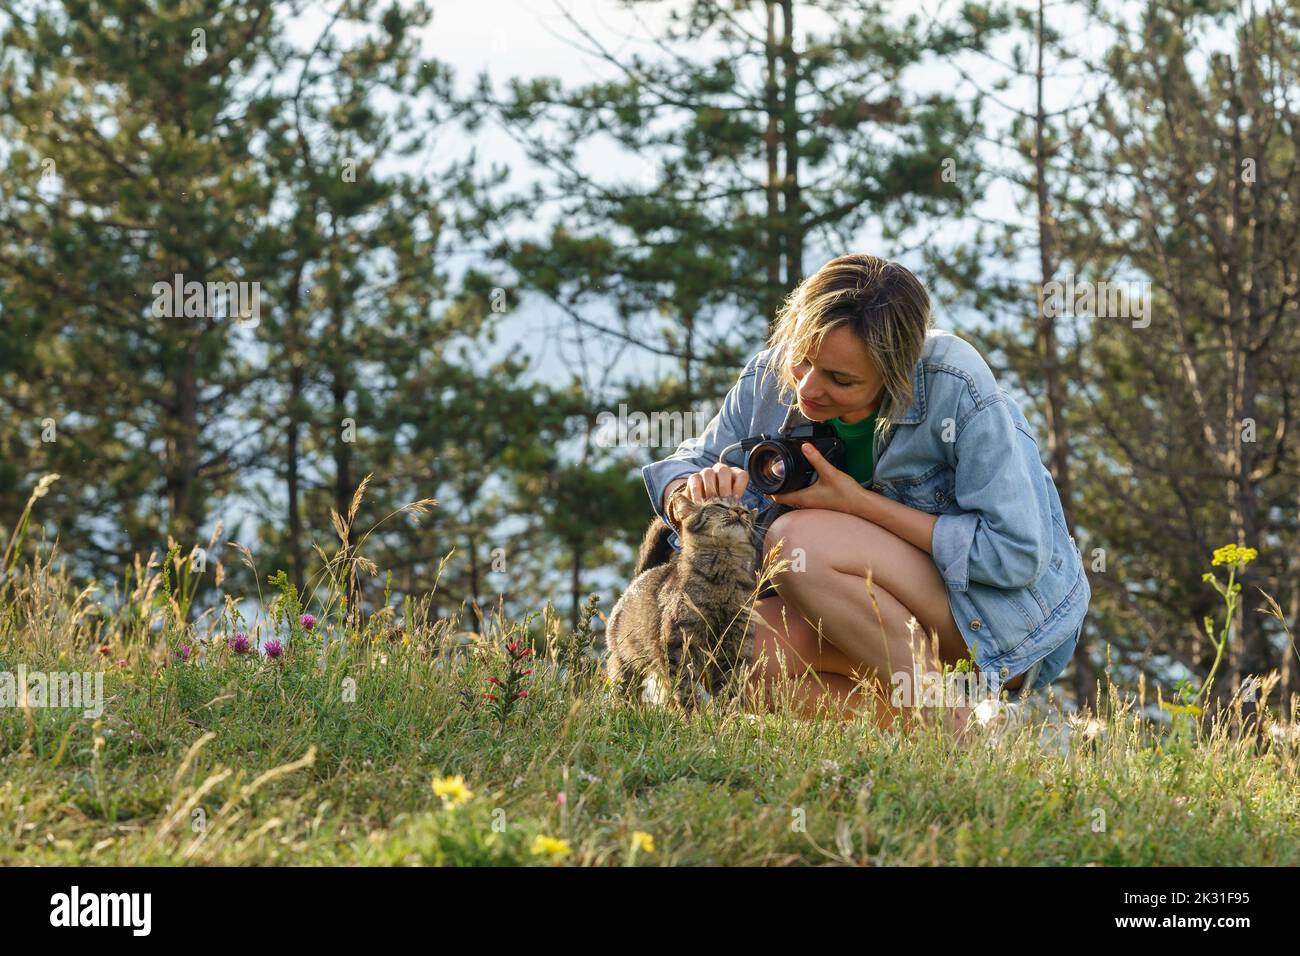 Woman photographer plays with lonely cat walking on forest meadow against blurry green trees Stock Photo